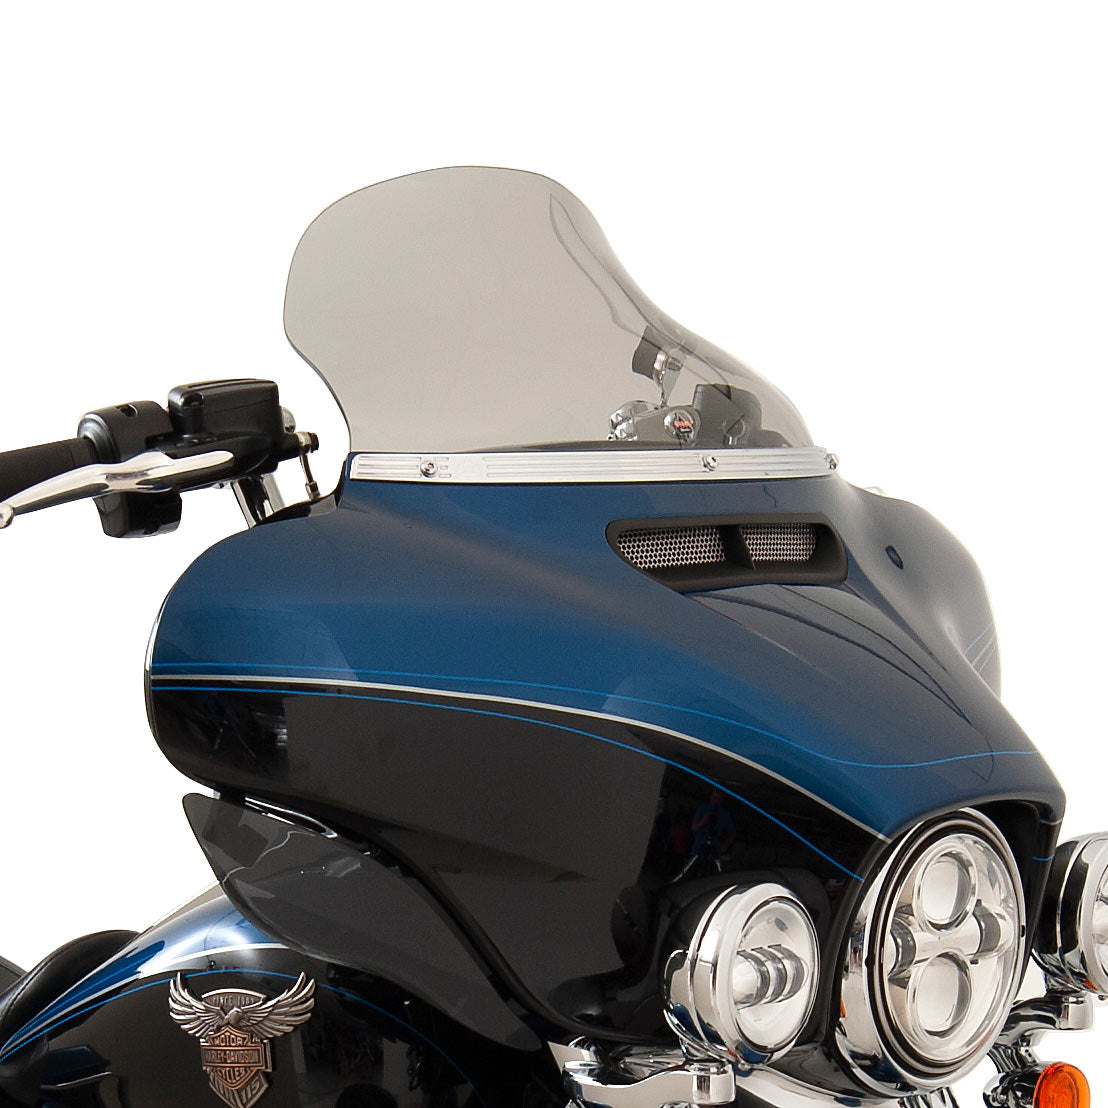 10.5" Tint Flare™ Windshield for 2014-2023 Harley-Davidson FLH Motorcycle Models(10.5" Tint)